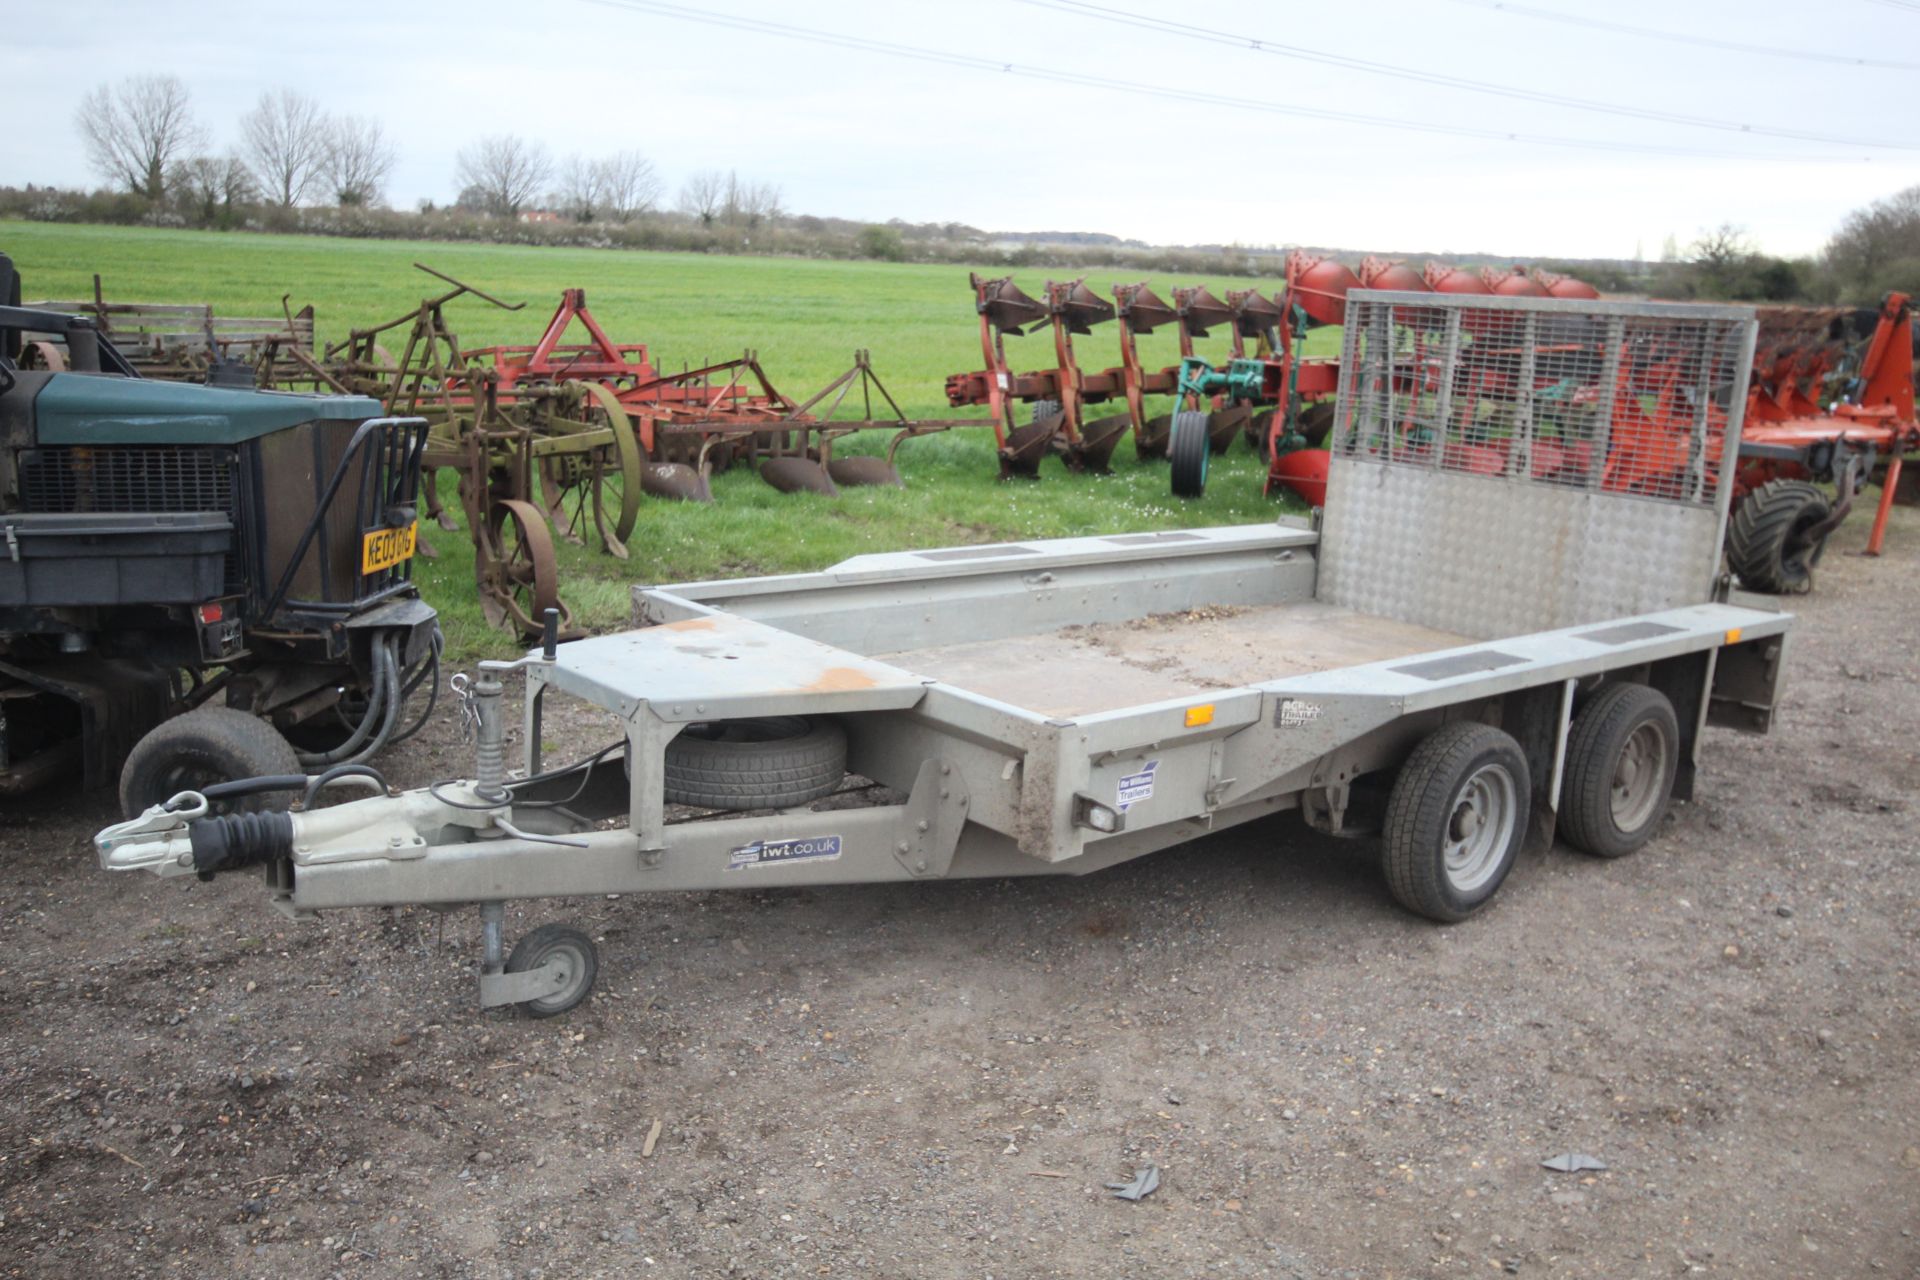 Ifor Williams 10ft x 5ft twin axle plant trailer. Purchased new 12/2021. With key and manual. Key,